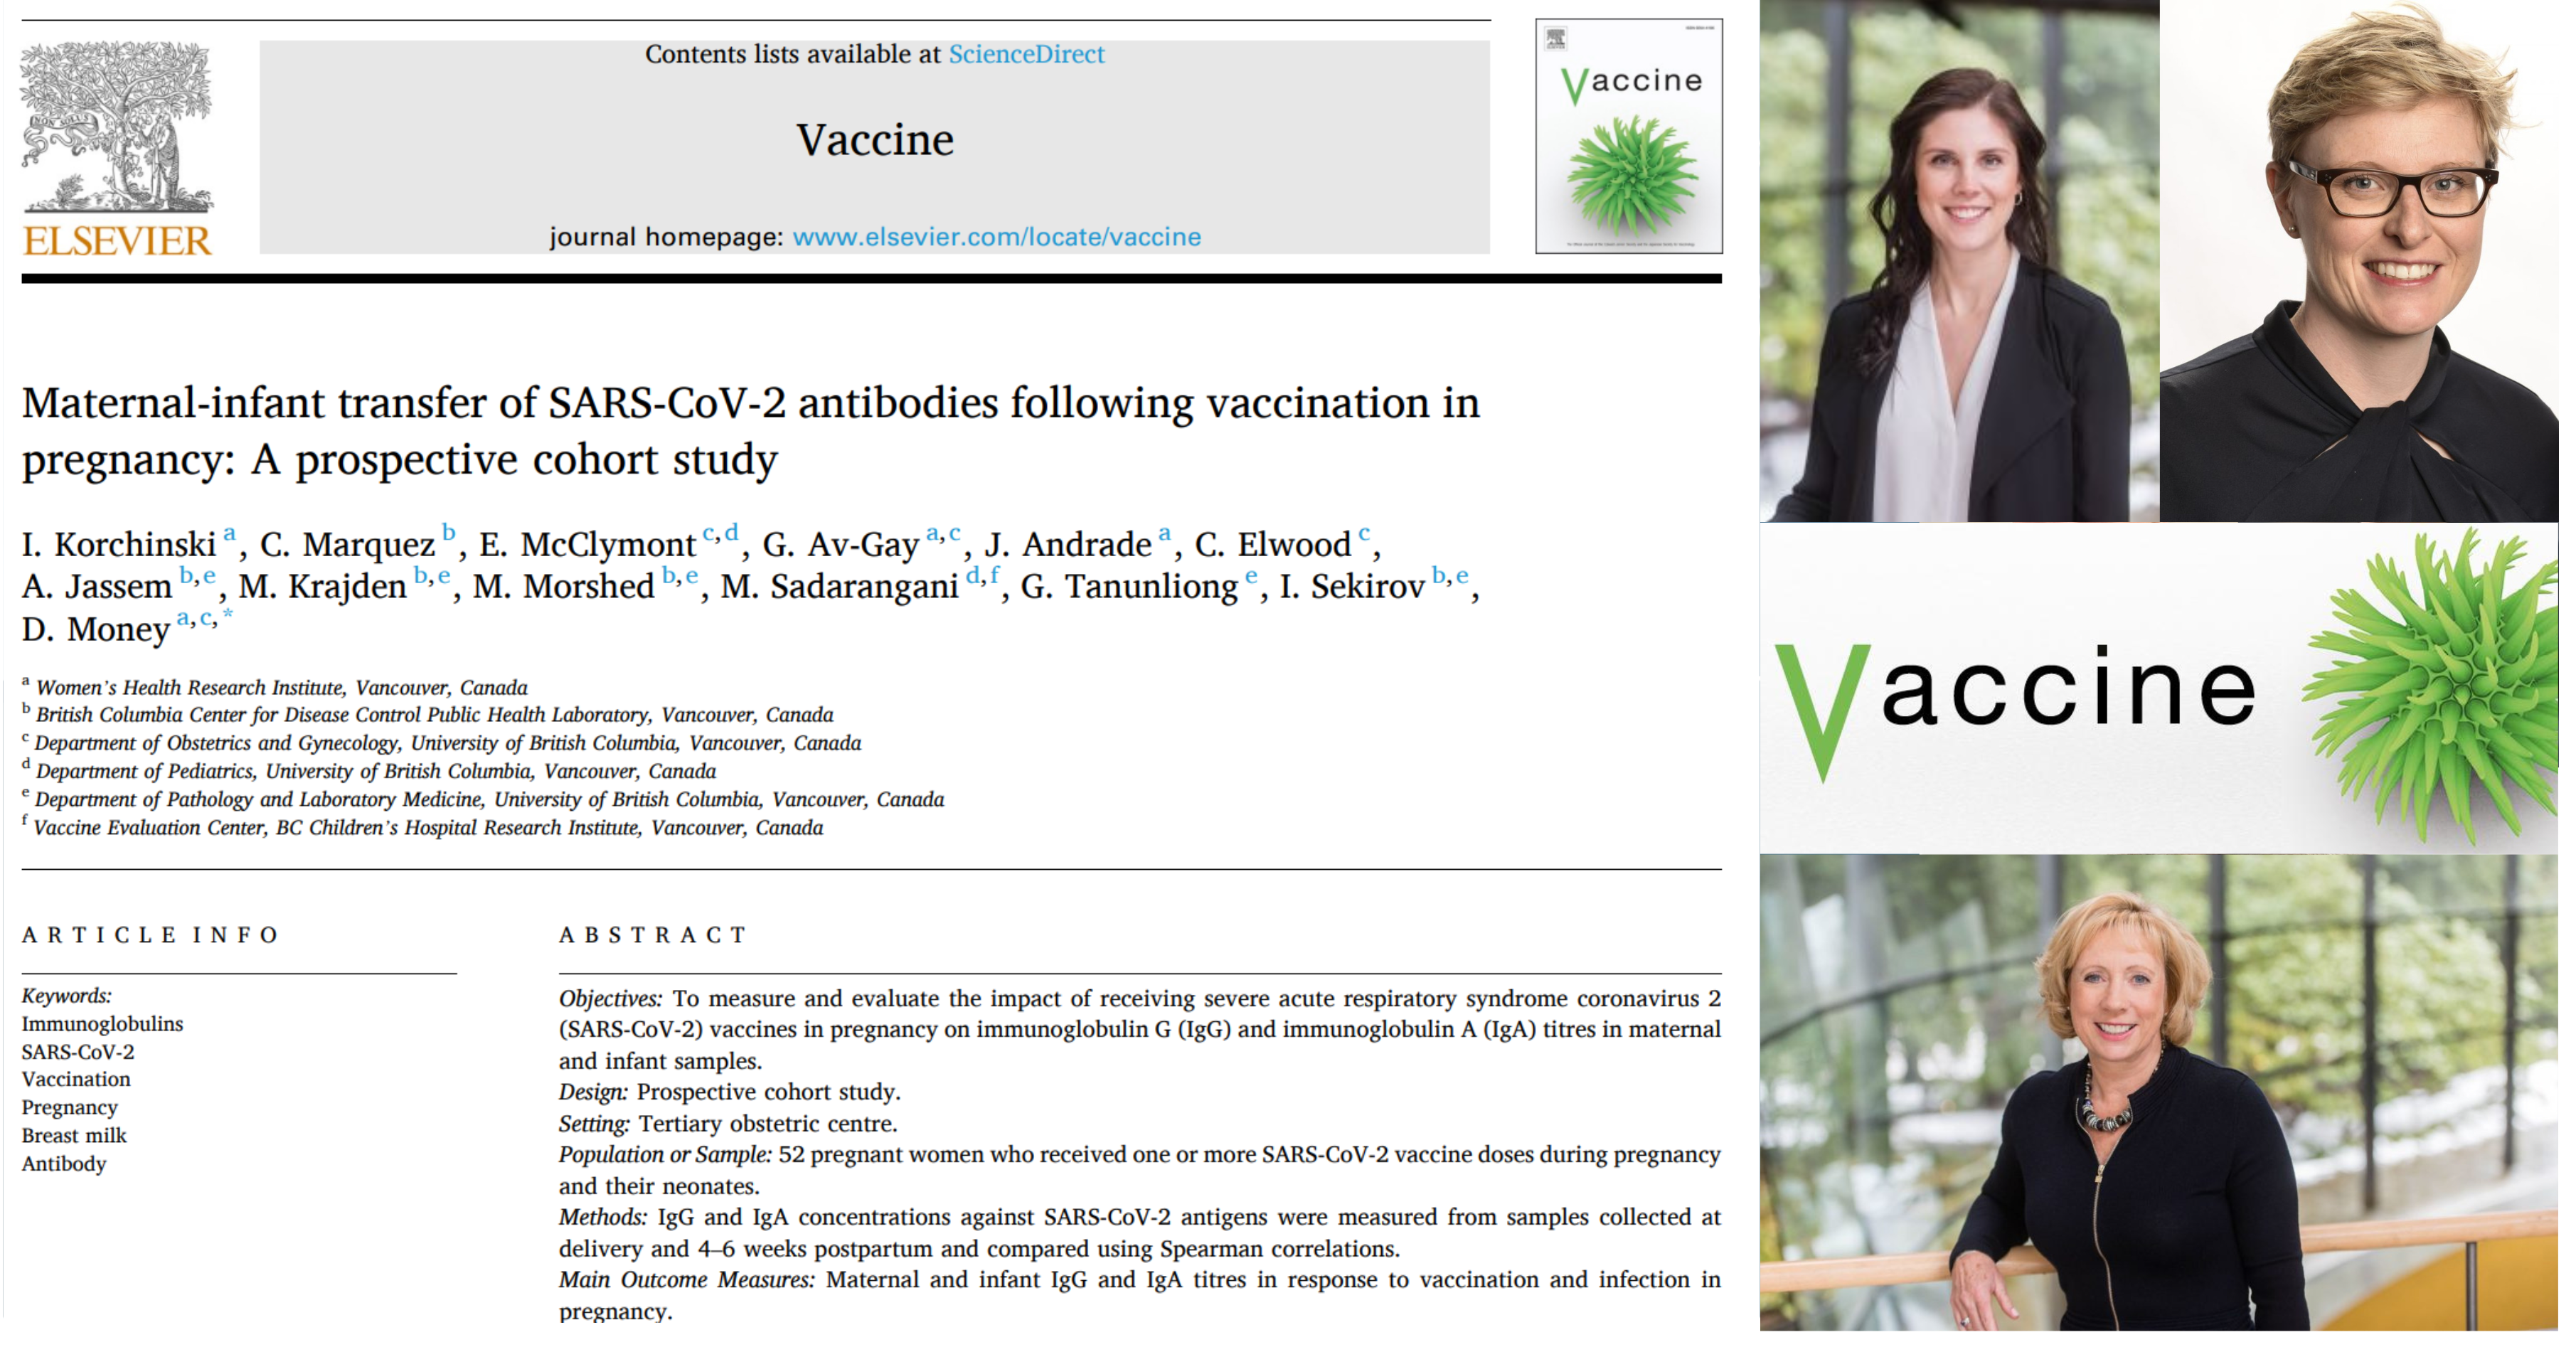 New Publication: “Maternal-infant transfer of SARS-CoV-2 antibodies following vaccination in pregnancy: A prospective cohort study” published in Vaccine!